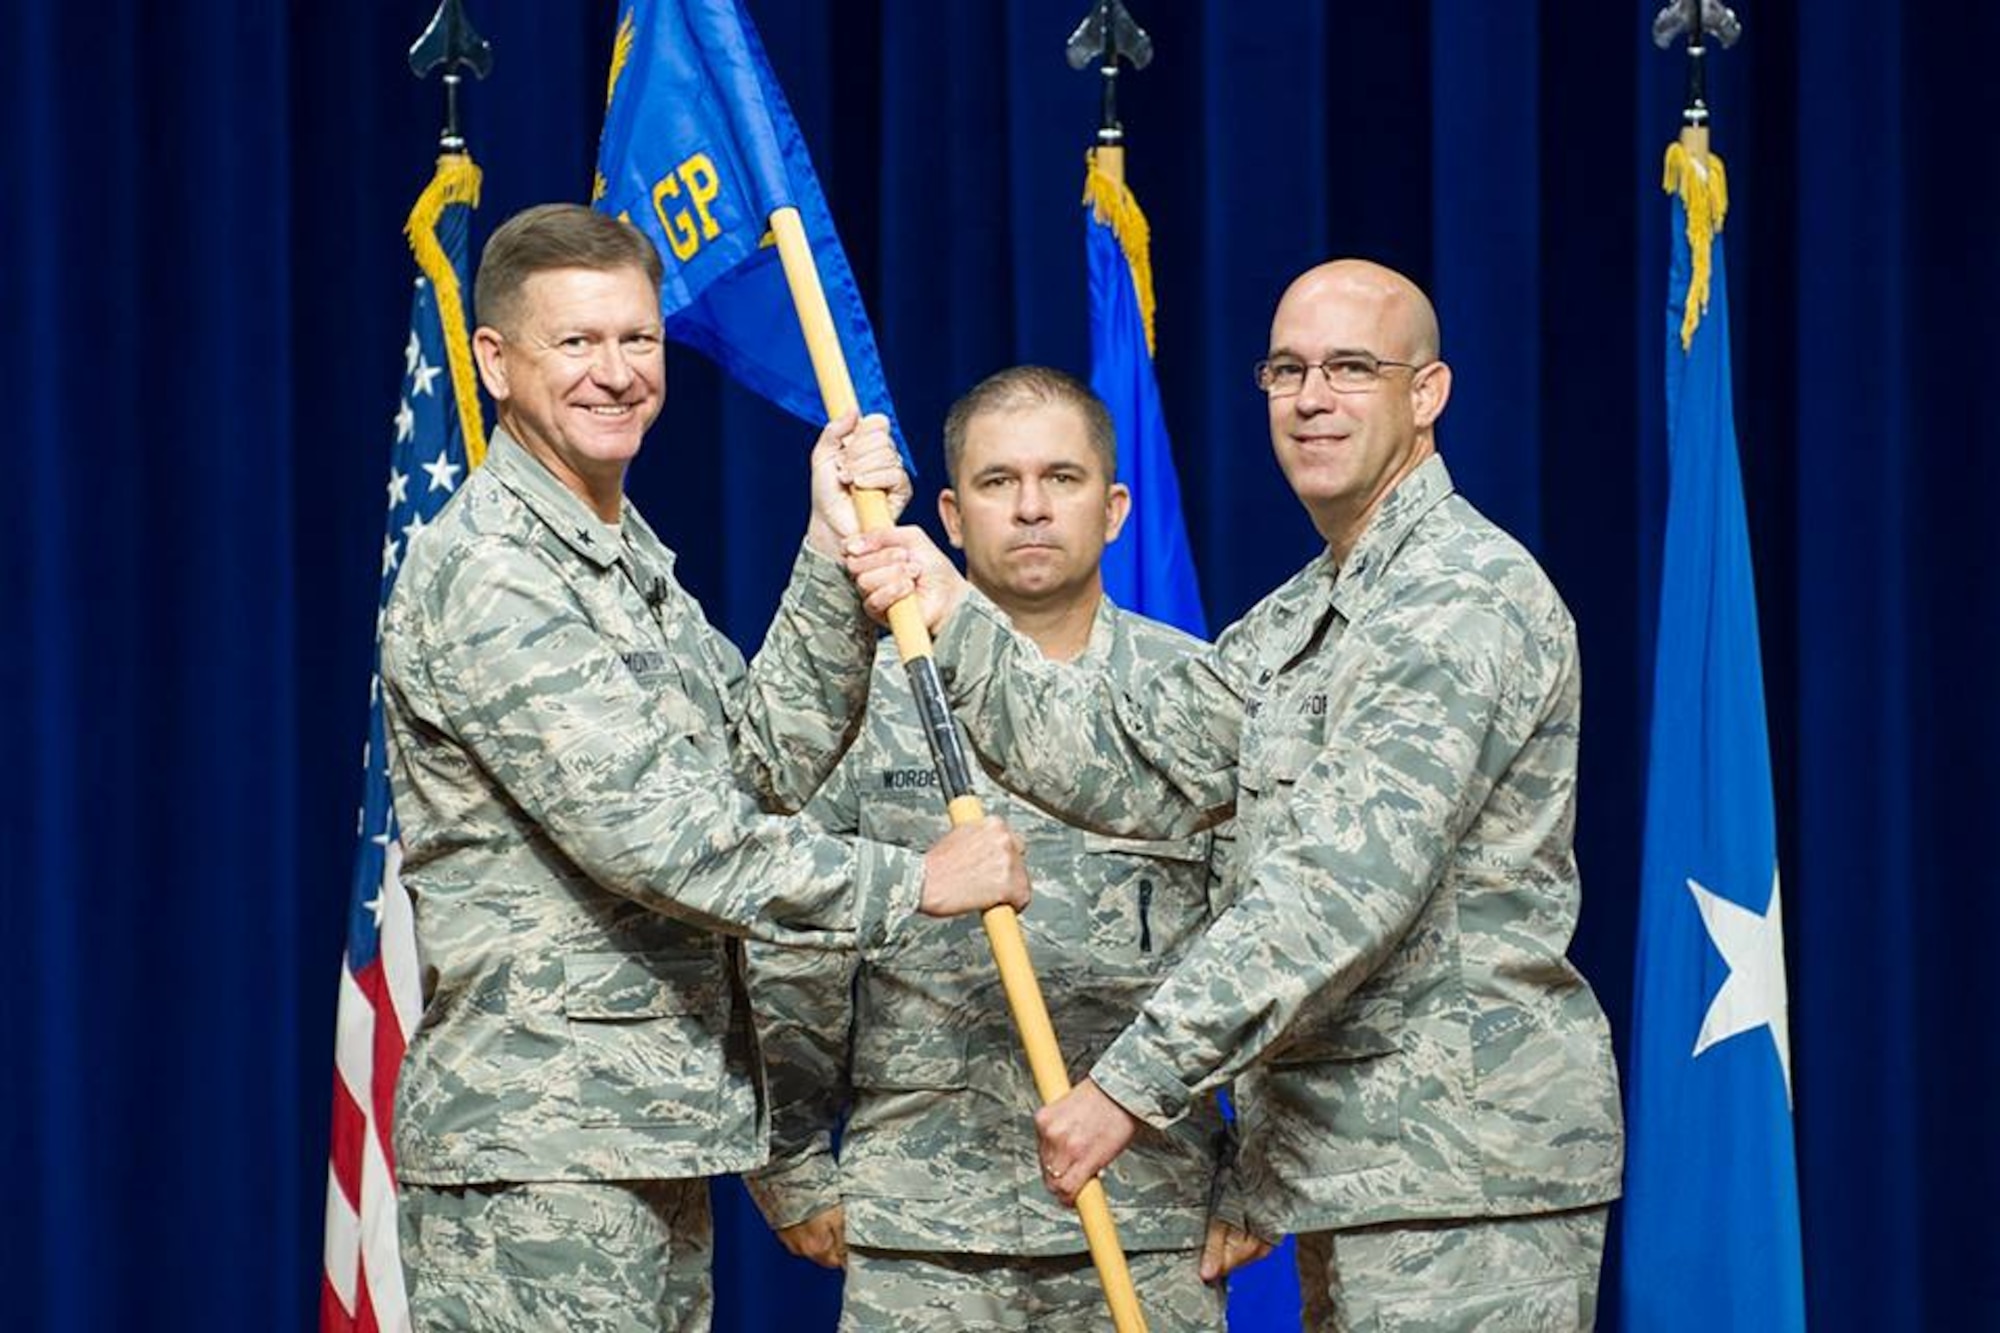 Brig. Gen. Wayne Monteith, commander of the 45th Space Wing, presents Col. Steven Lang, commander of the 45th Operations Group, with the 45th OG guidon, July 31, 2018 at Patrick Air Force Base, Fla. The 45th Launch Group inactivated and combined their launch mission and personnel with the 45th OG. (U.S. Air Force photo by Phillip Sunkel)